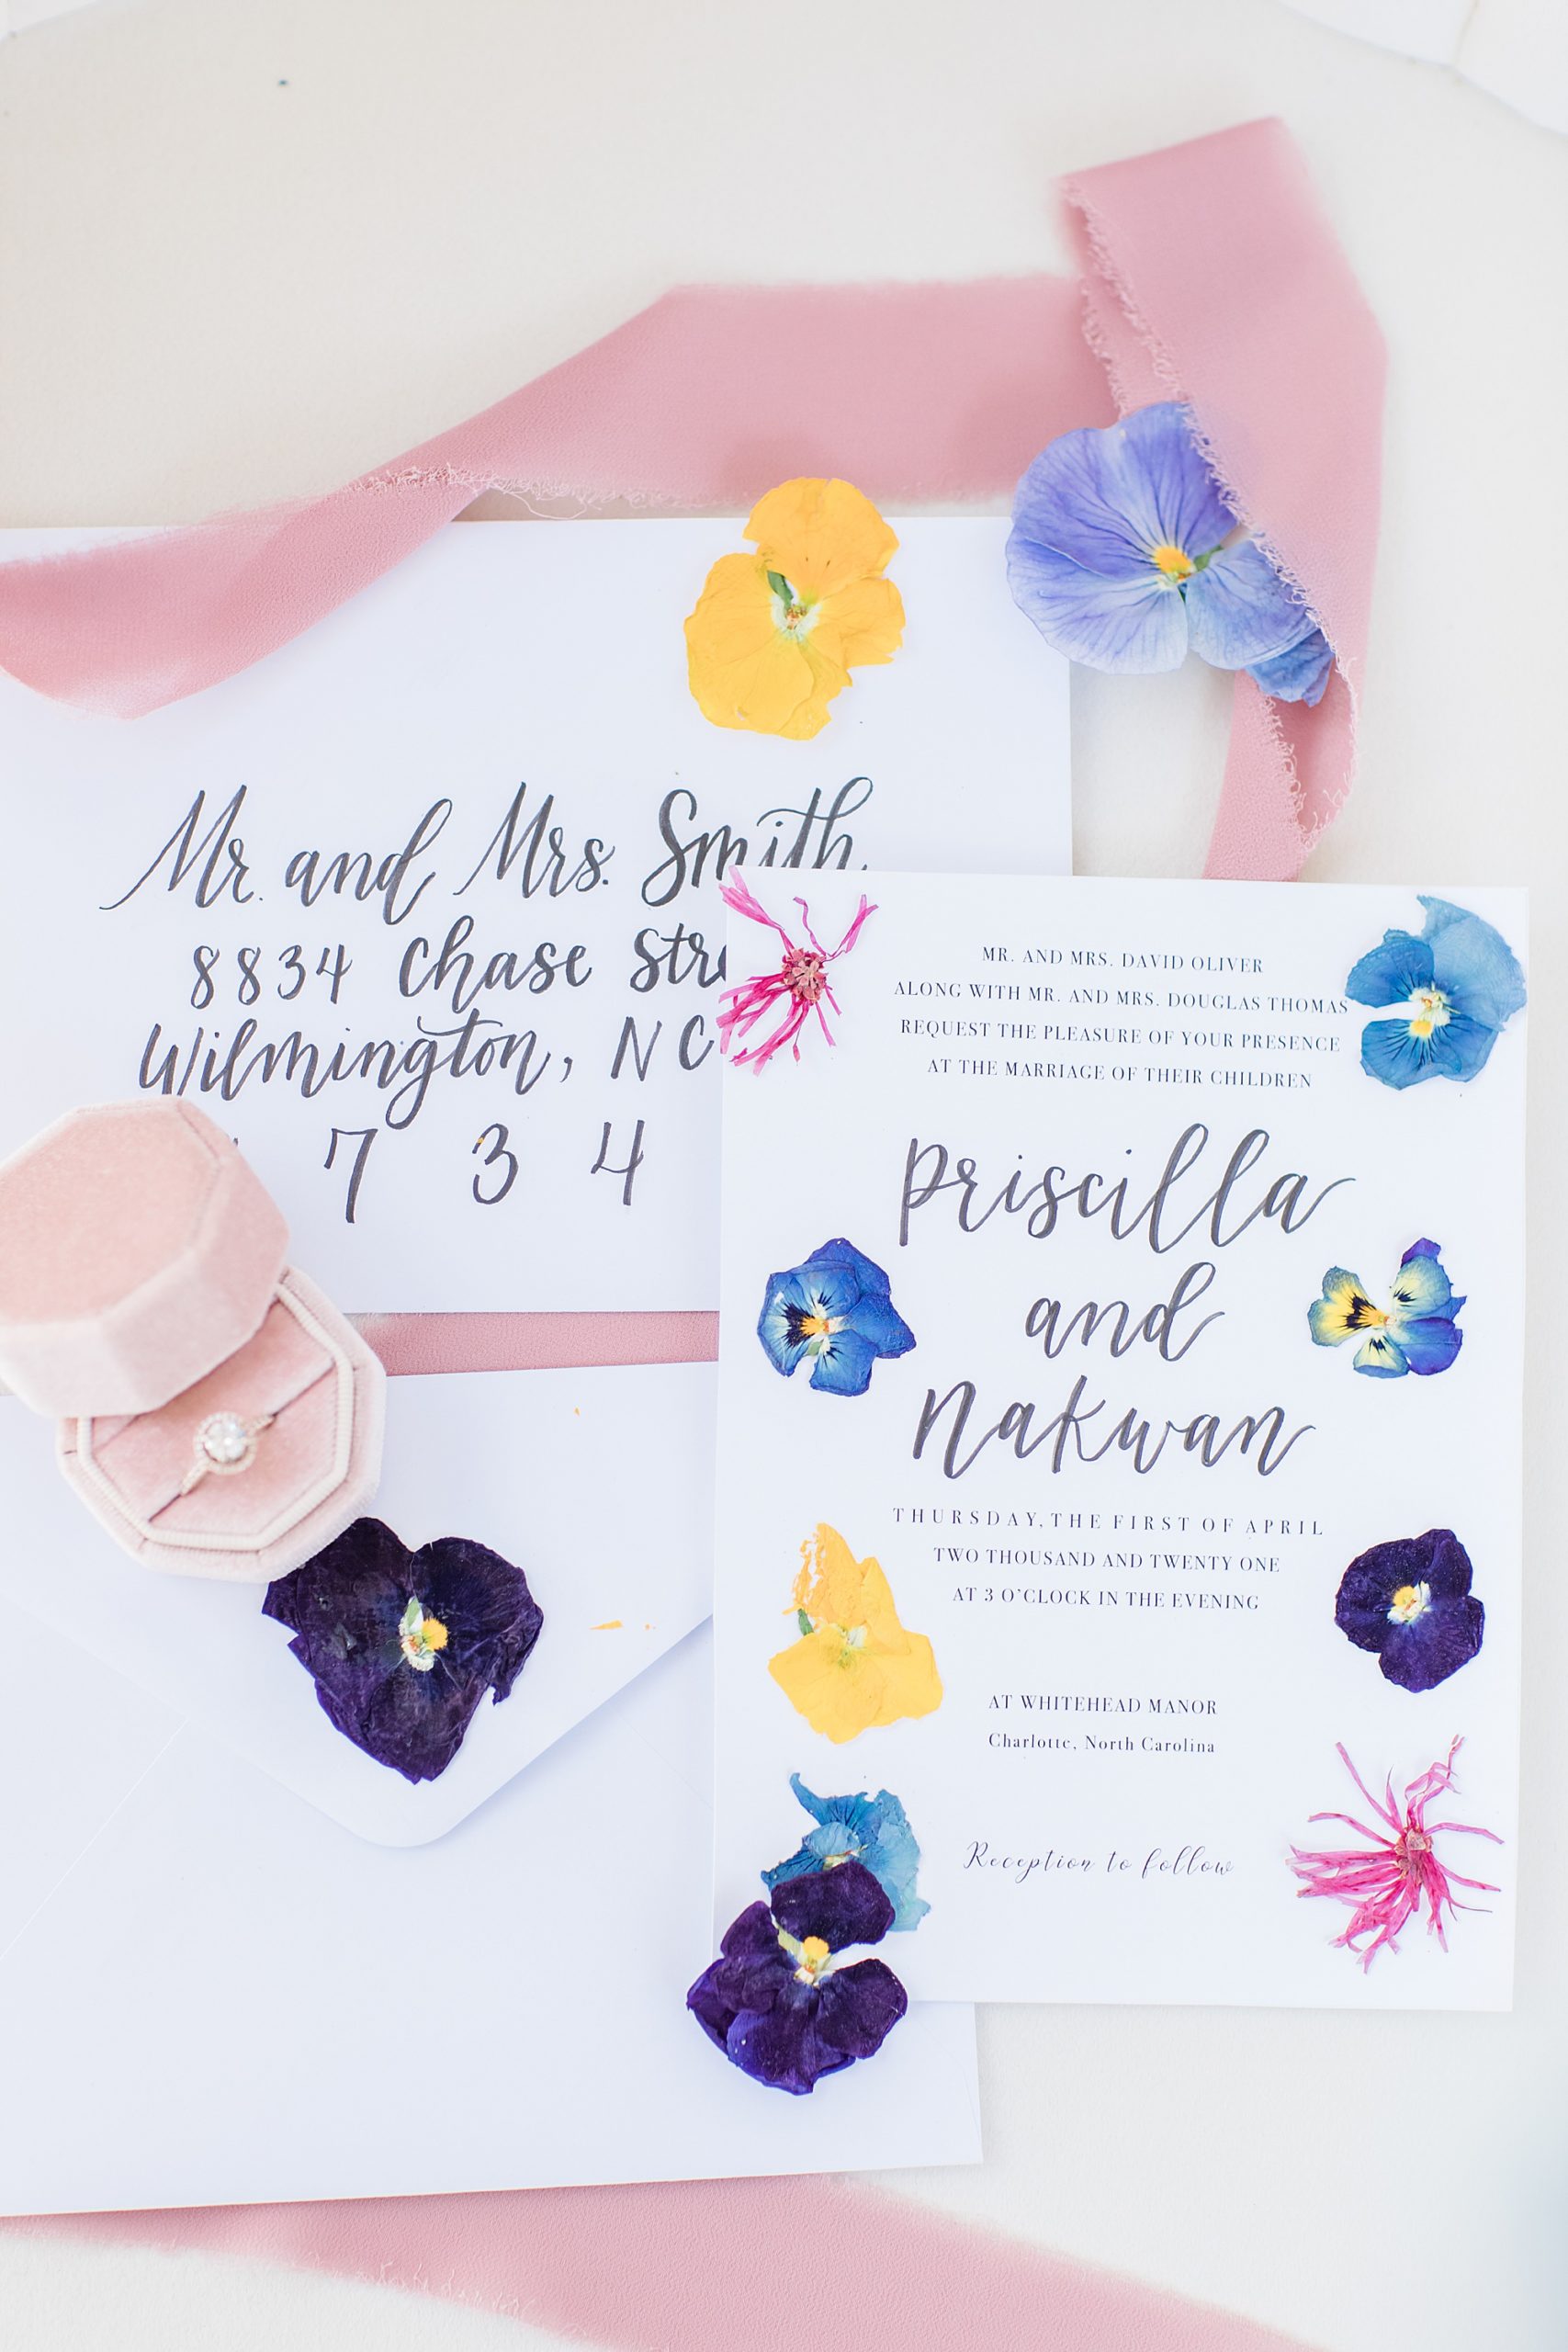 inviation suite with calligraphy and painted watercolor flowers